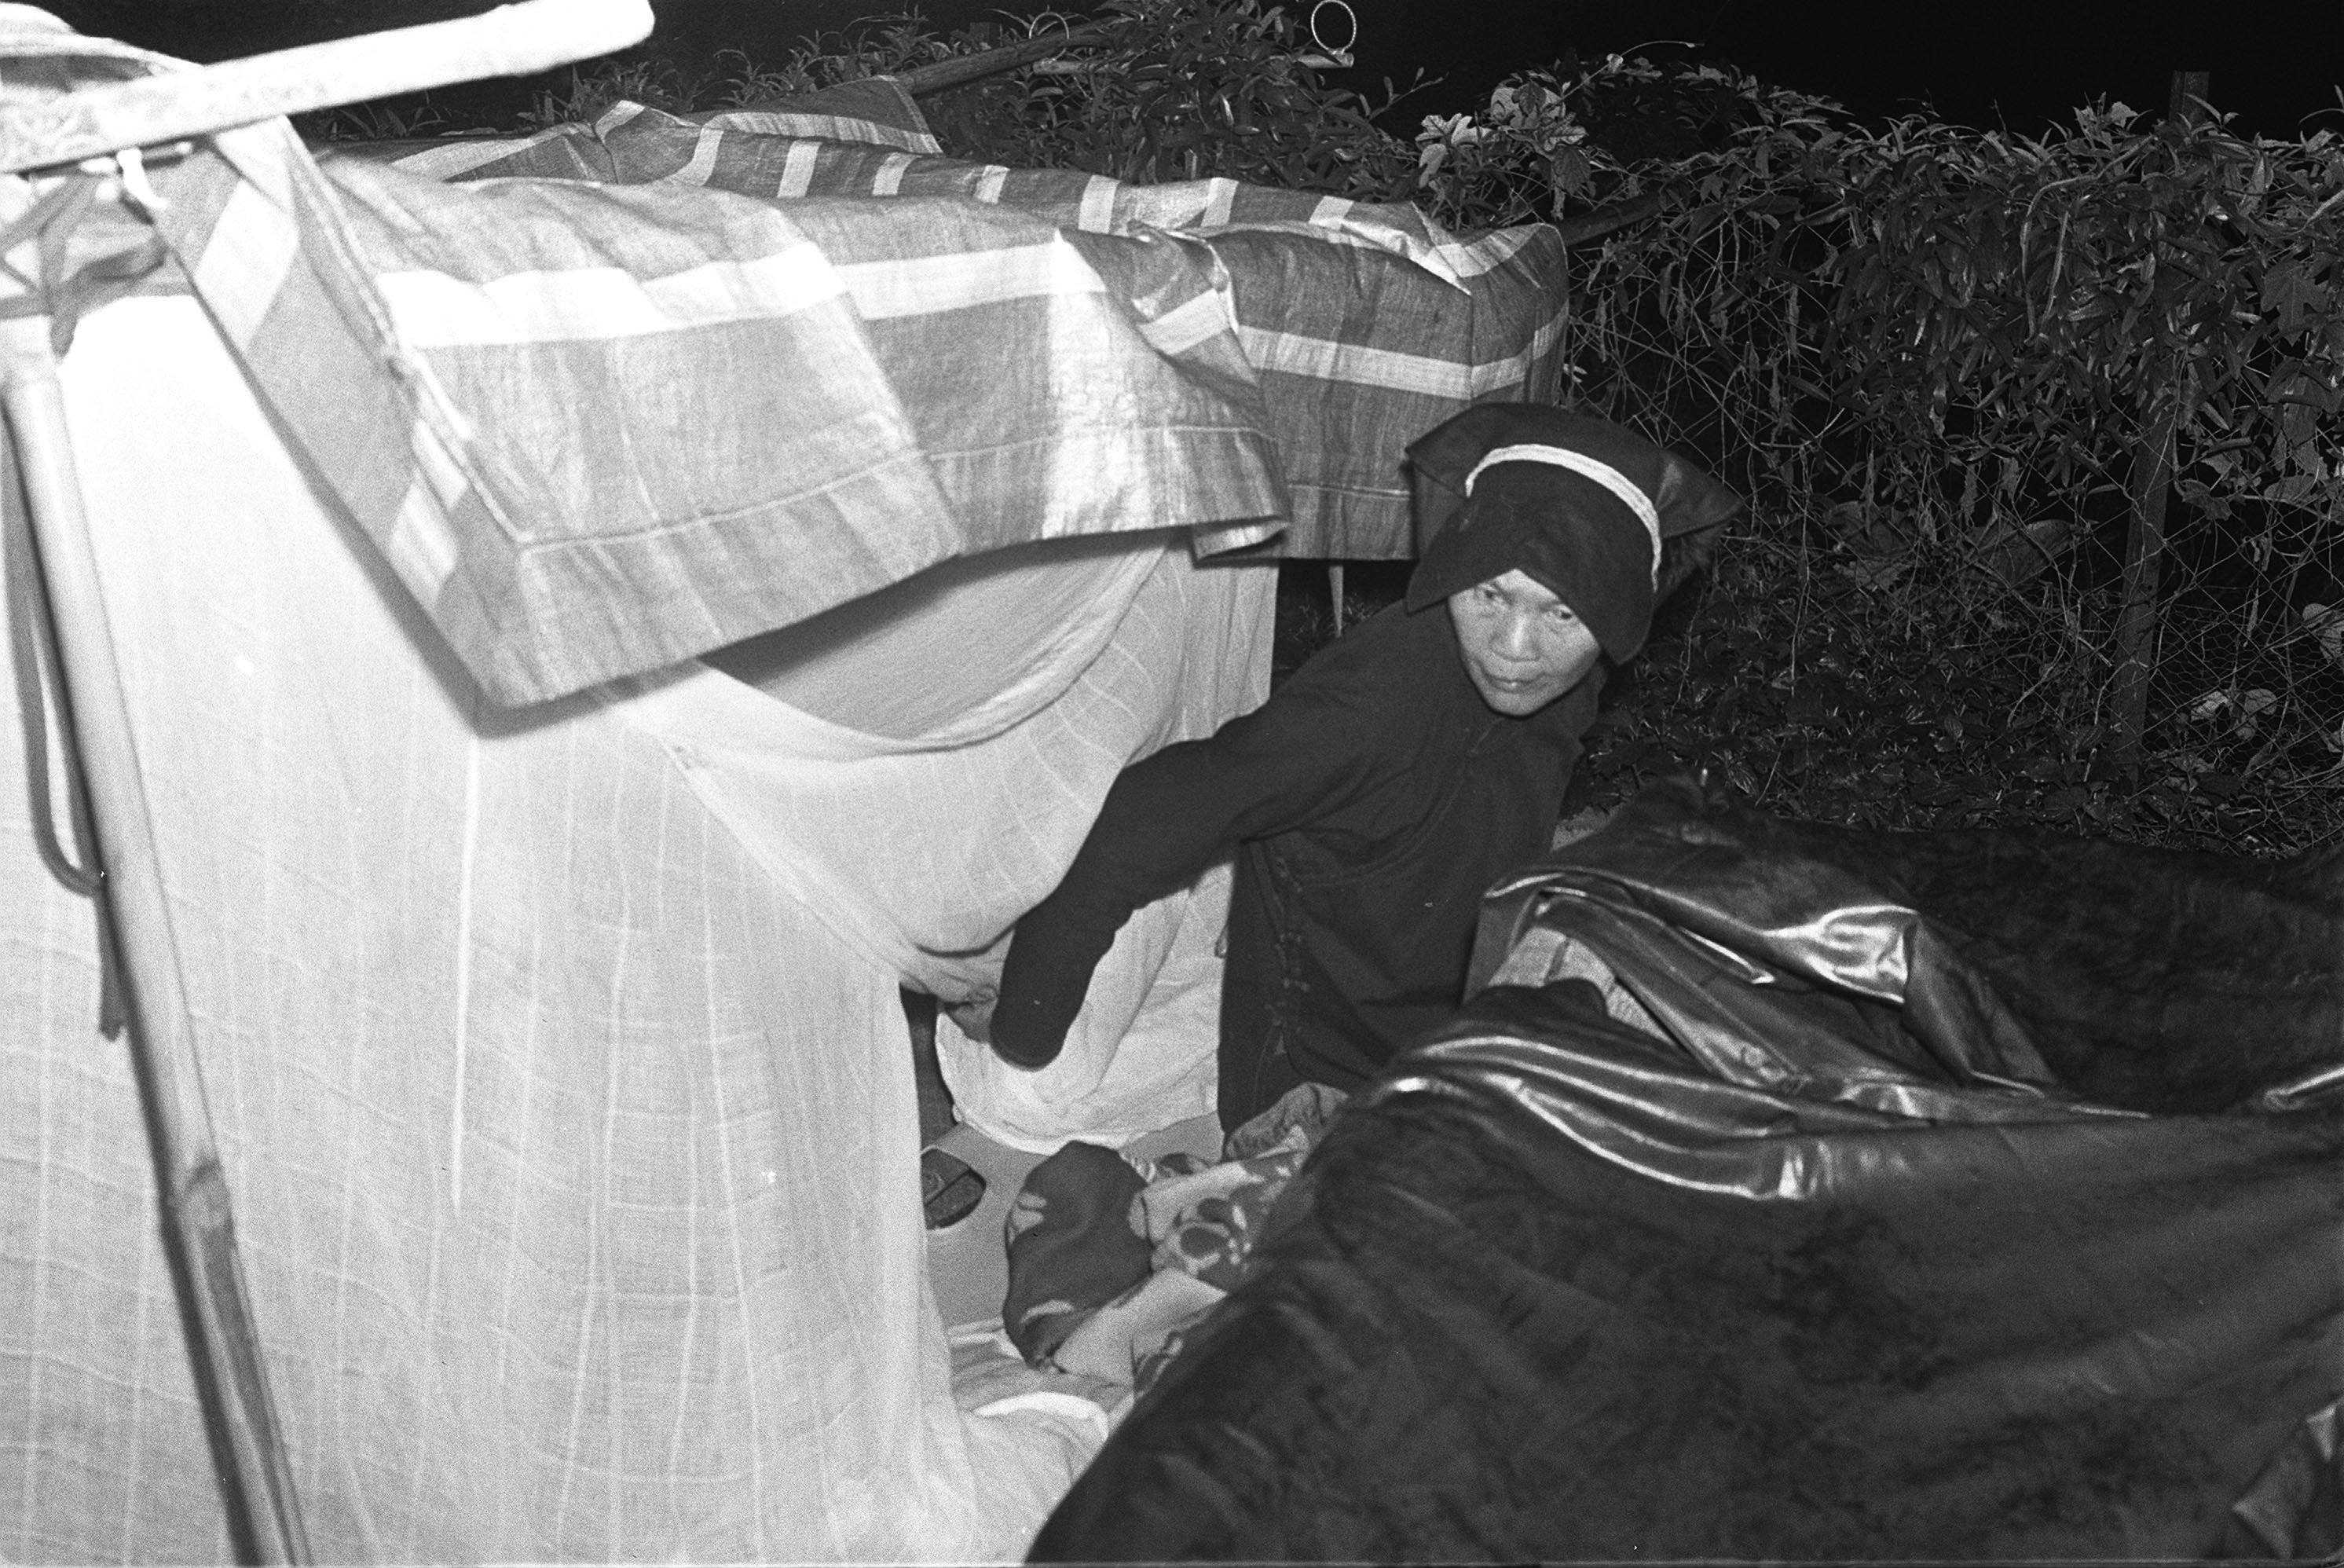 When in 1976 villagers in Sha Tau Kok, in Hong Kong’s New Territories slept in the open for fear of an earthquake, they made sure to use tents with mosquito nets. Photo: SCMP